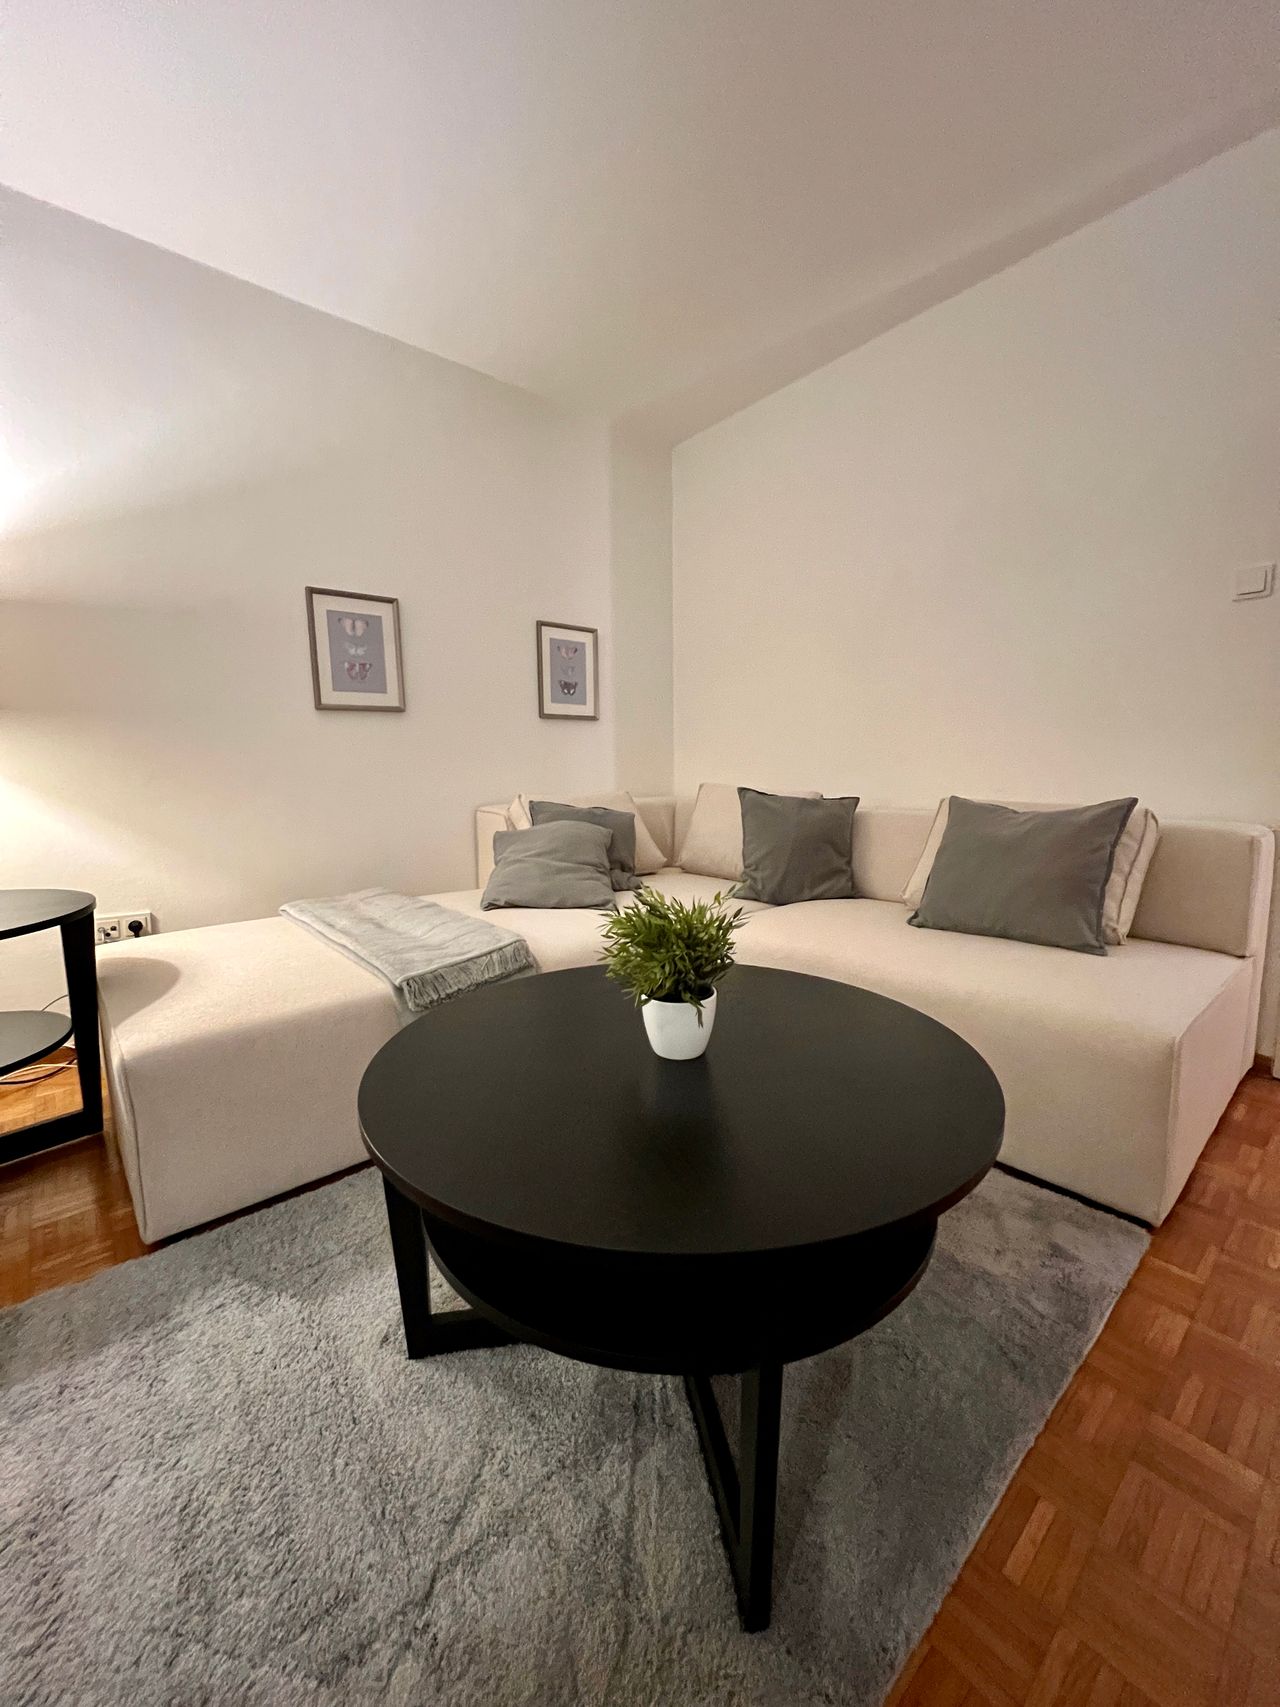 Quiet, central, sunny: 3 room flat in the heart of Munich-Schwabing